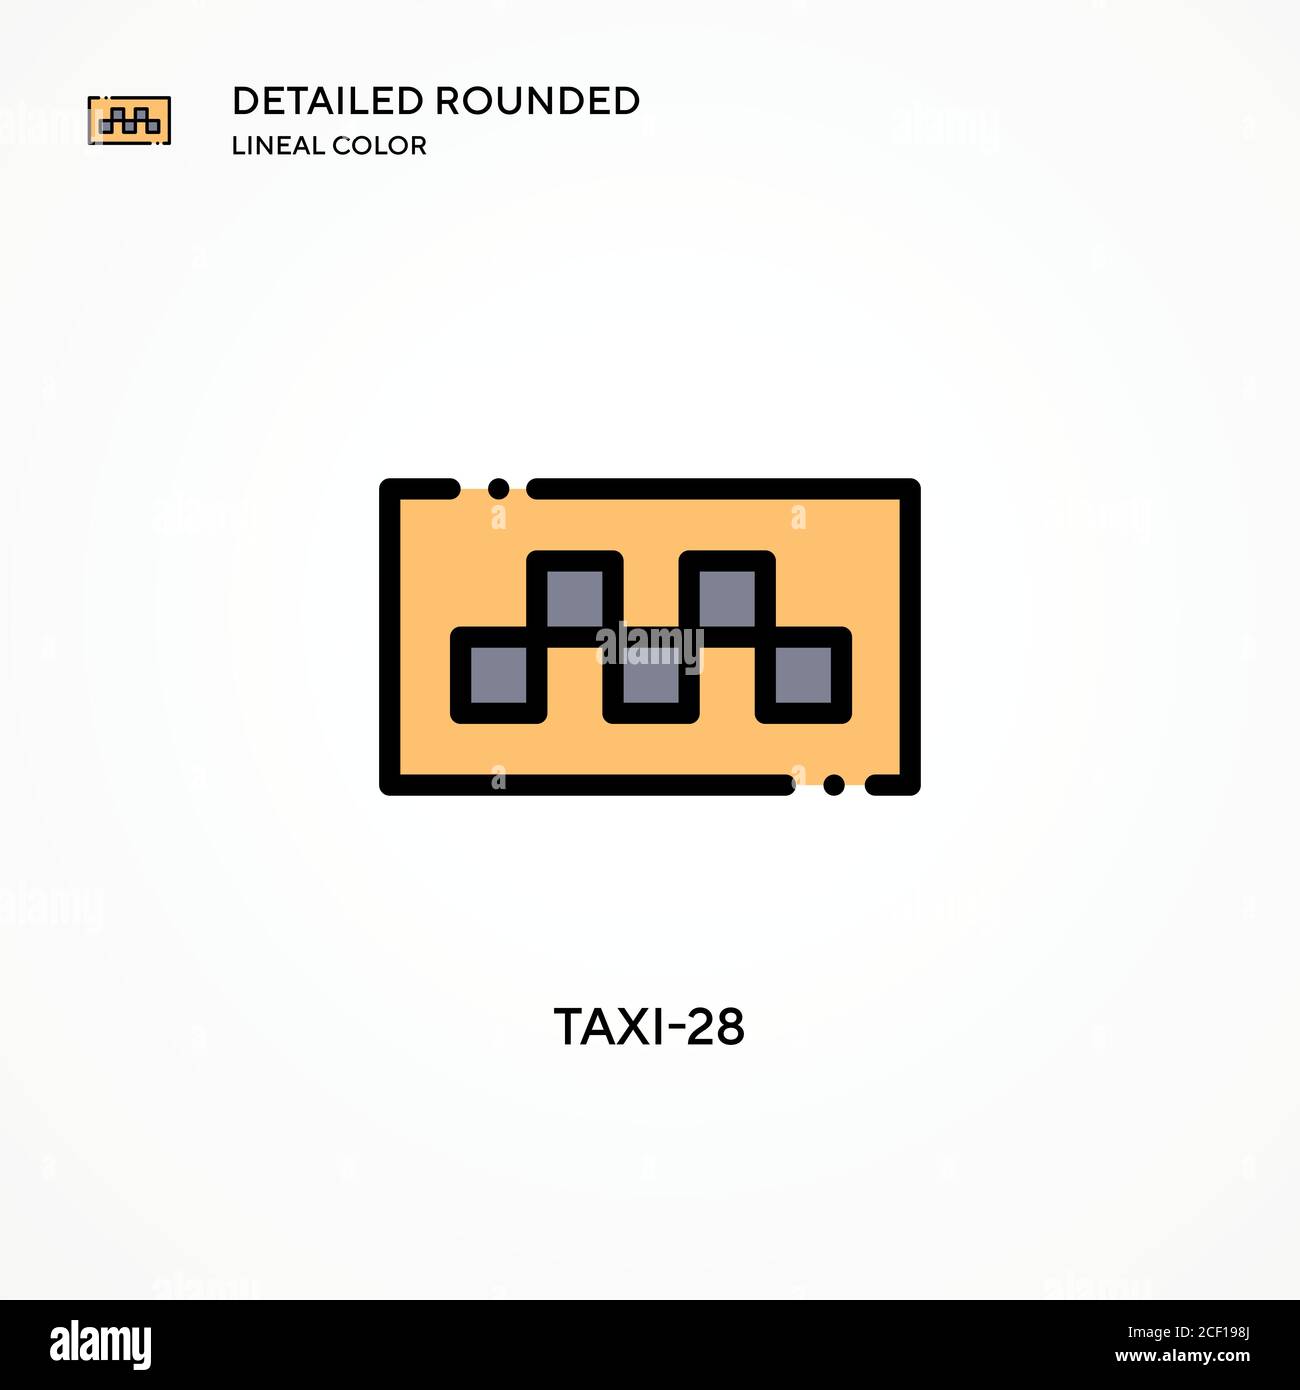 Taxi-28 vector icon. Modern vector illustration concepts. Easy to edit and customize. Stock Vector